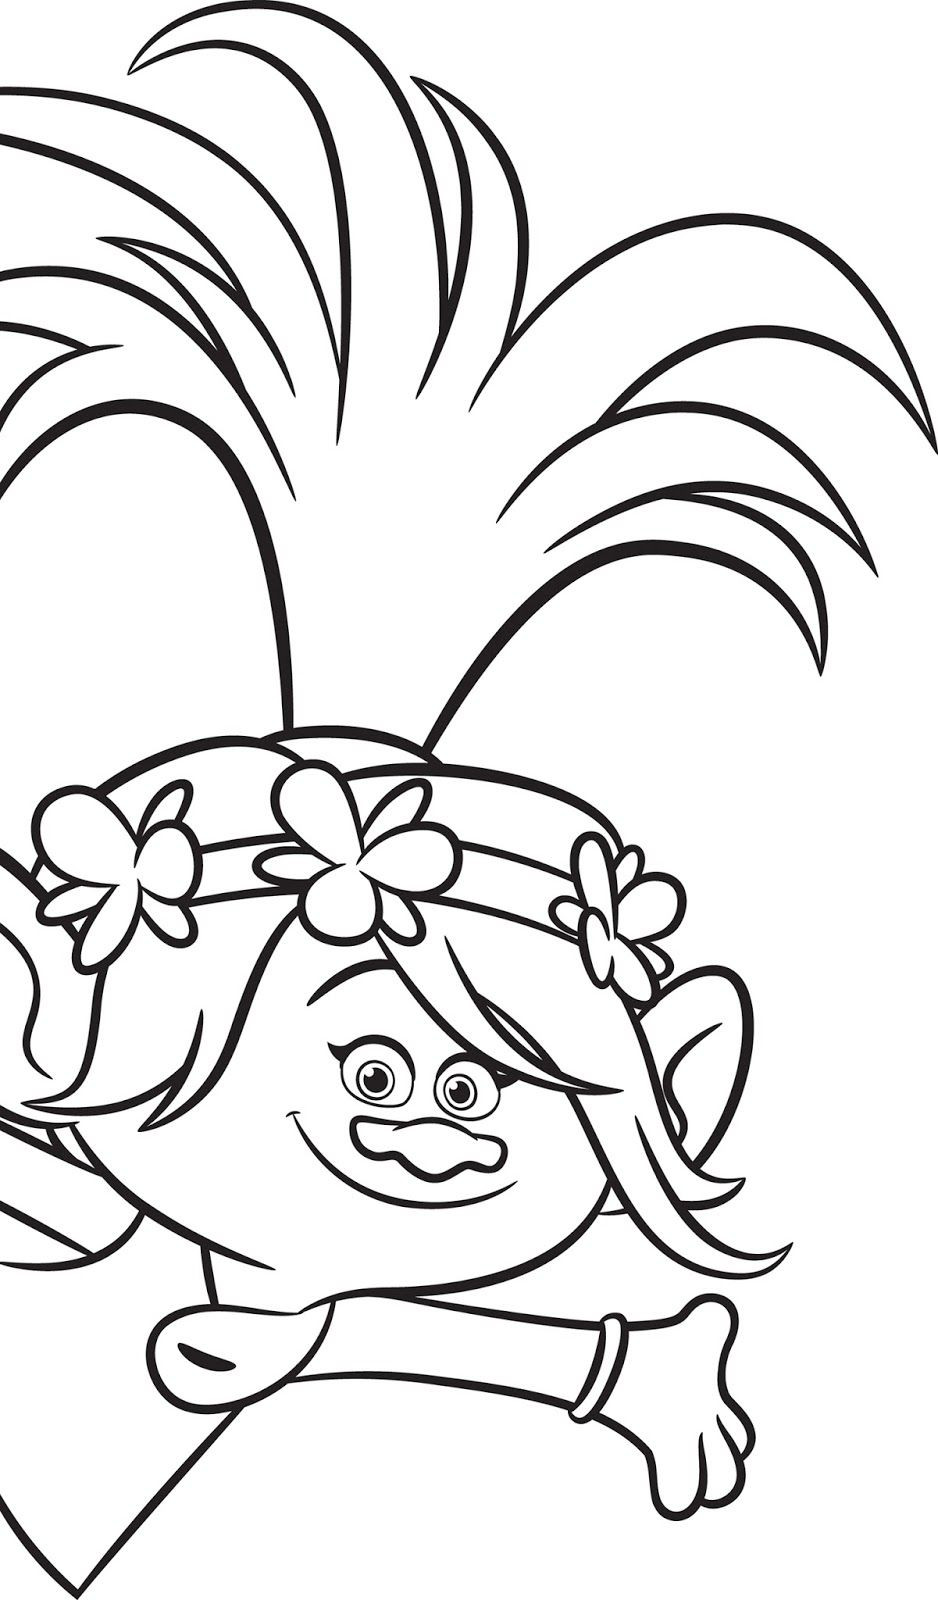 Coloring Pages For Kids Trolls
 Trolls hit Digital HD on January 24th and Blu ray DVD on